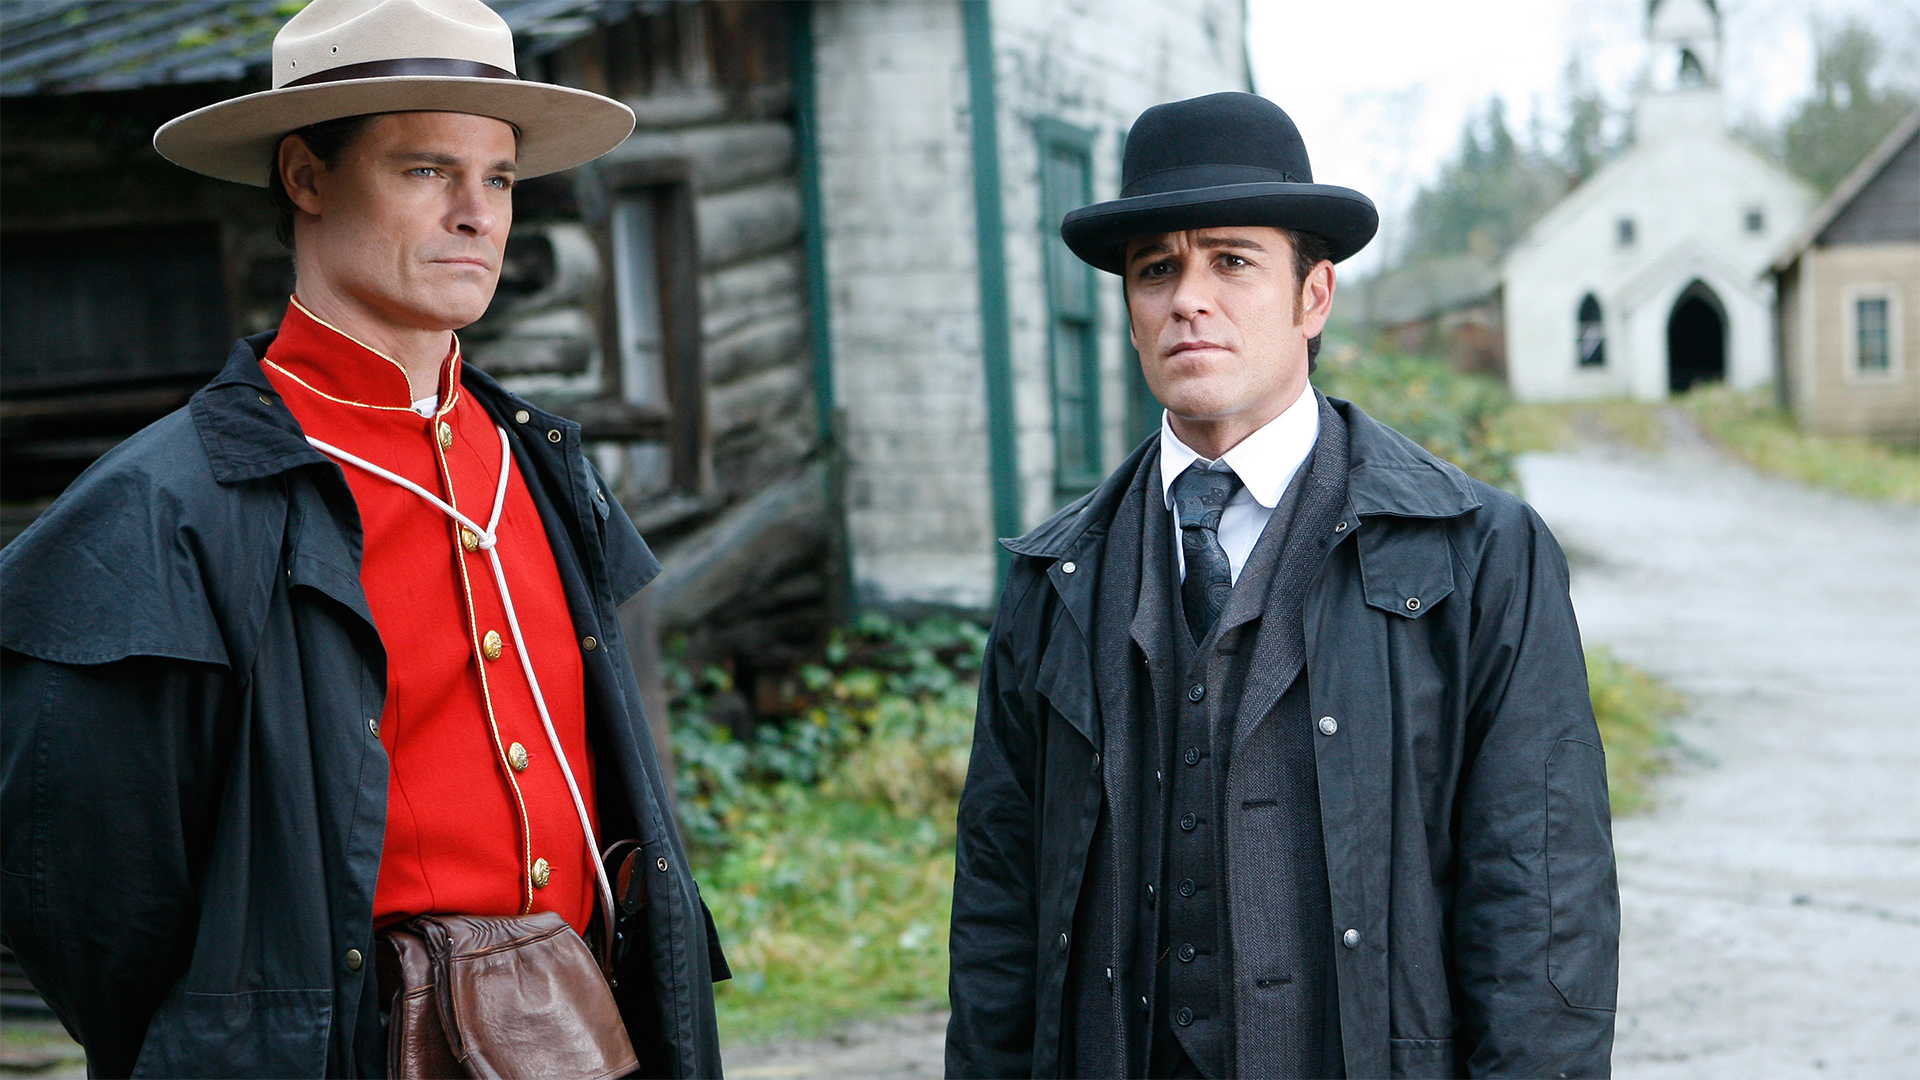 Murdoch Mysteries - S2E13 - Anything You Can Do...